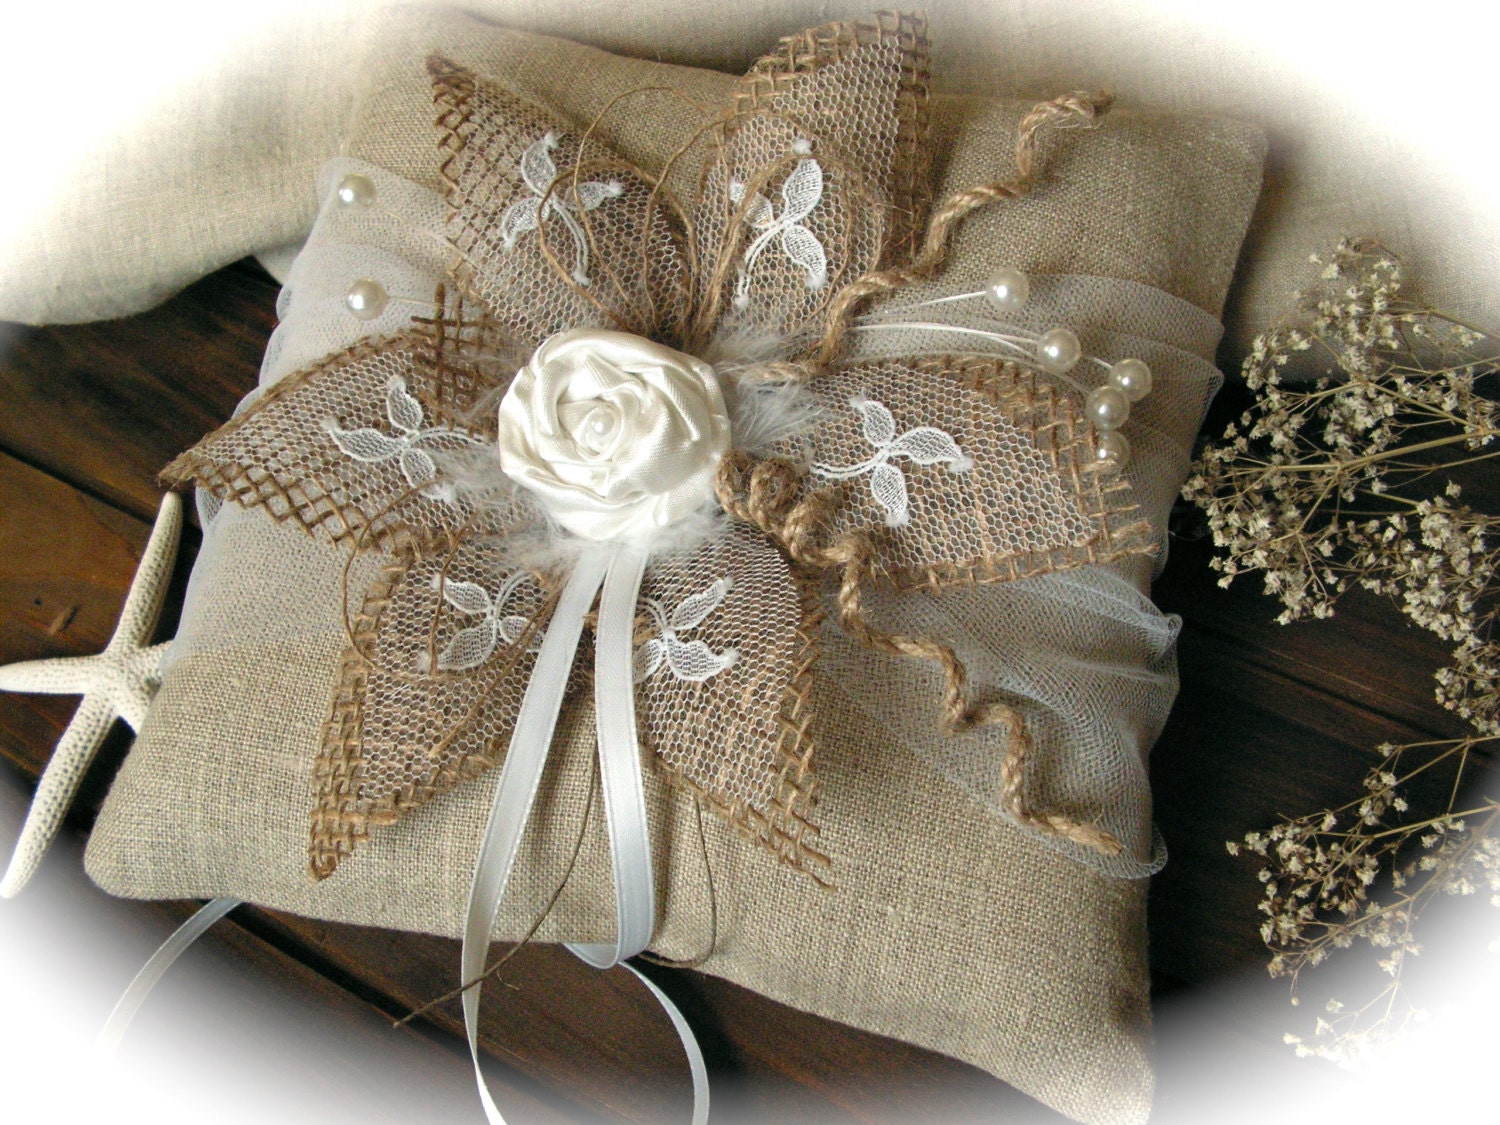 Rustic Chic Wedding ring bearer pillow with rope, lace, pearl and handmade burlap flower